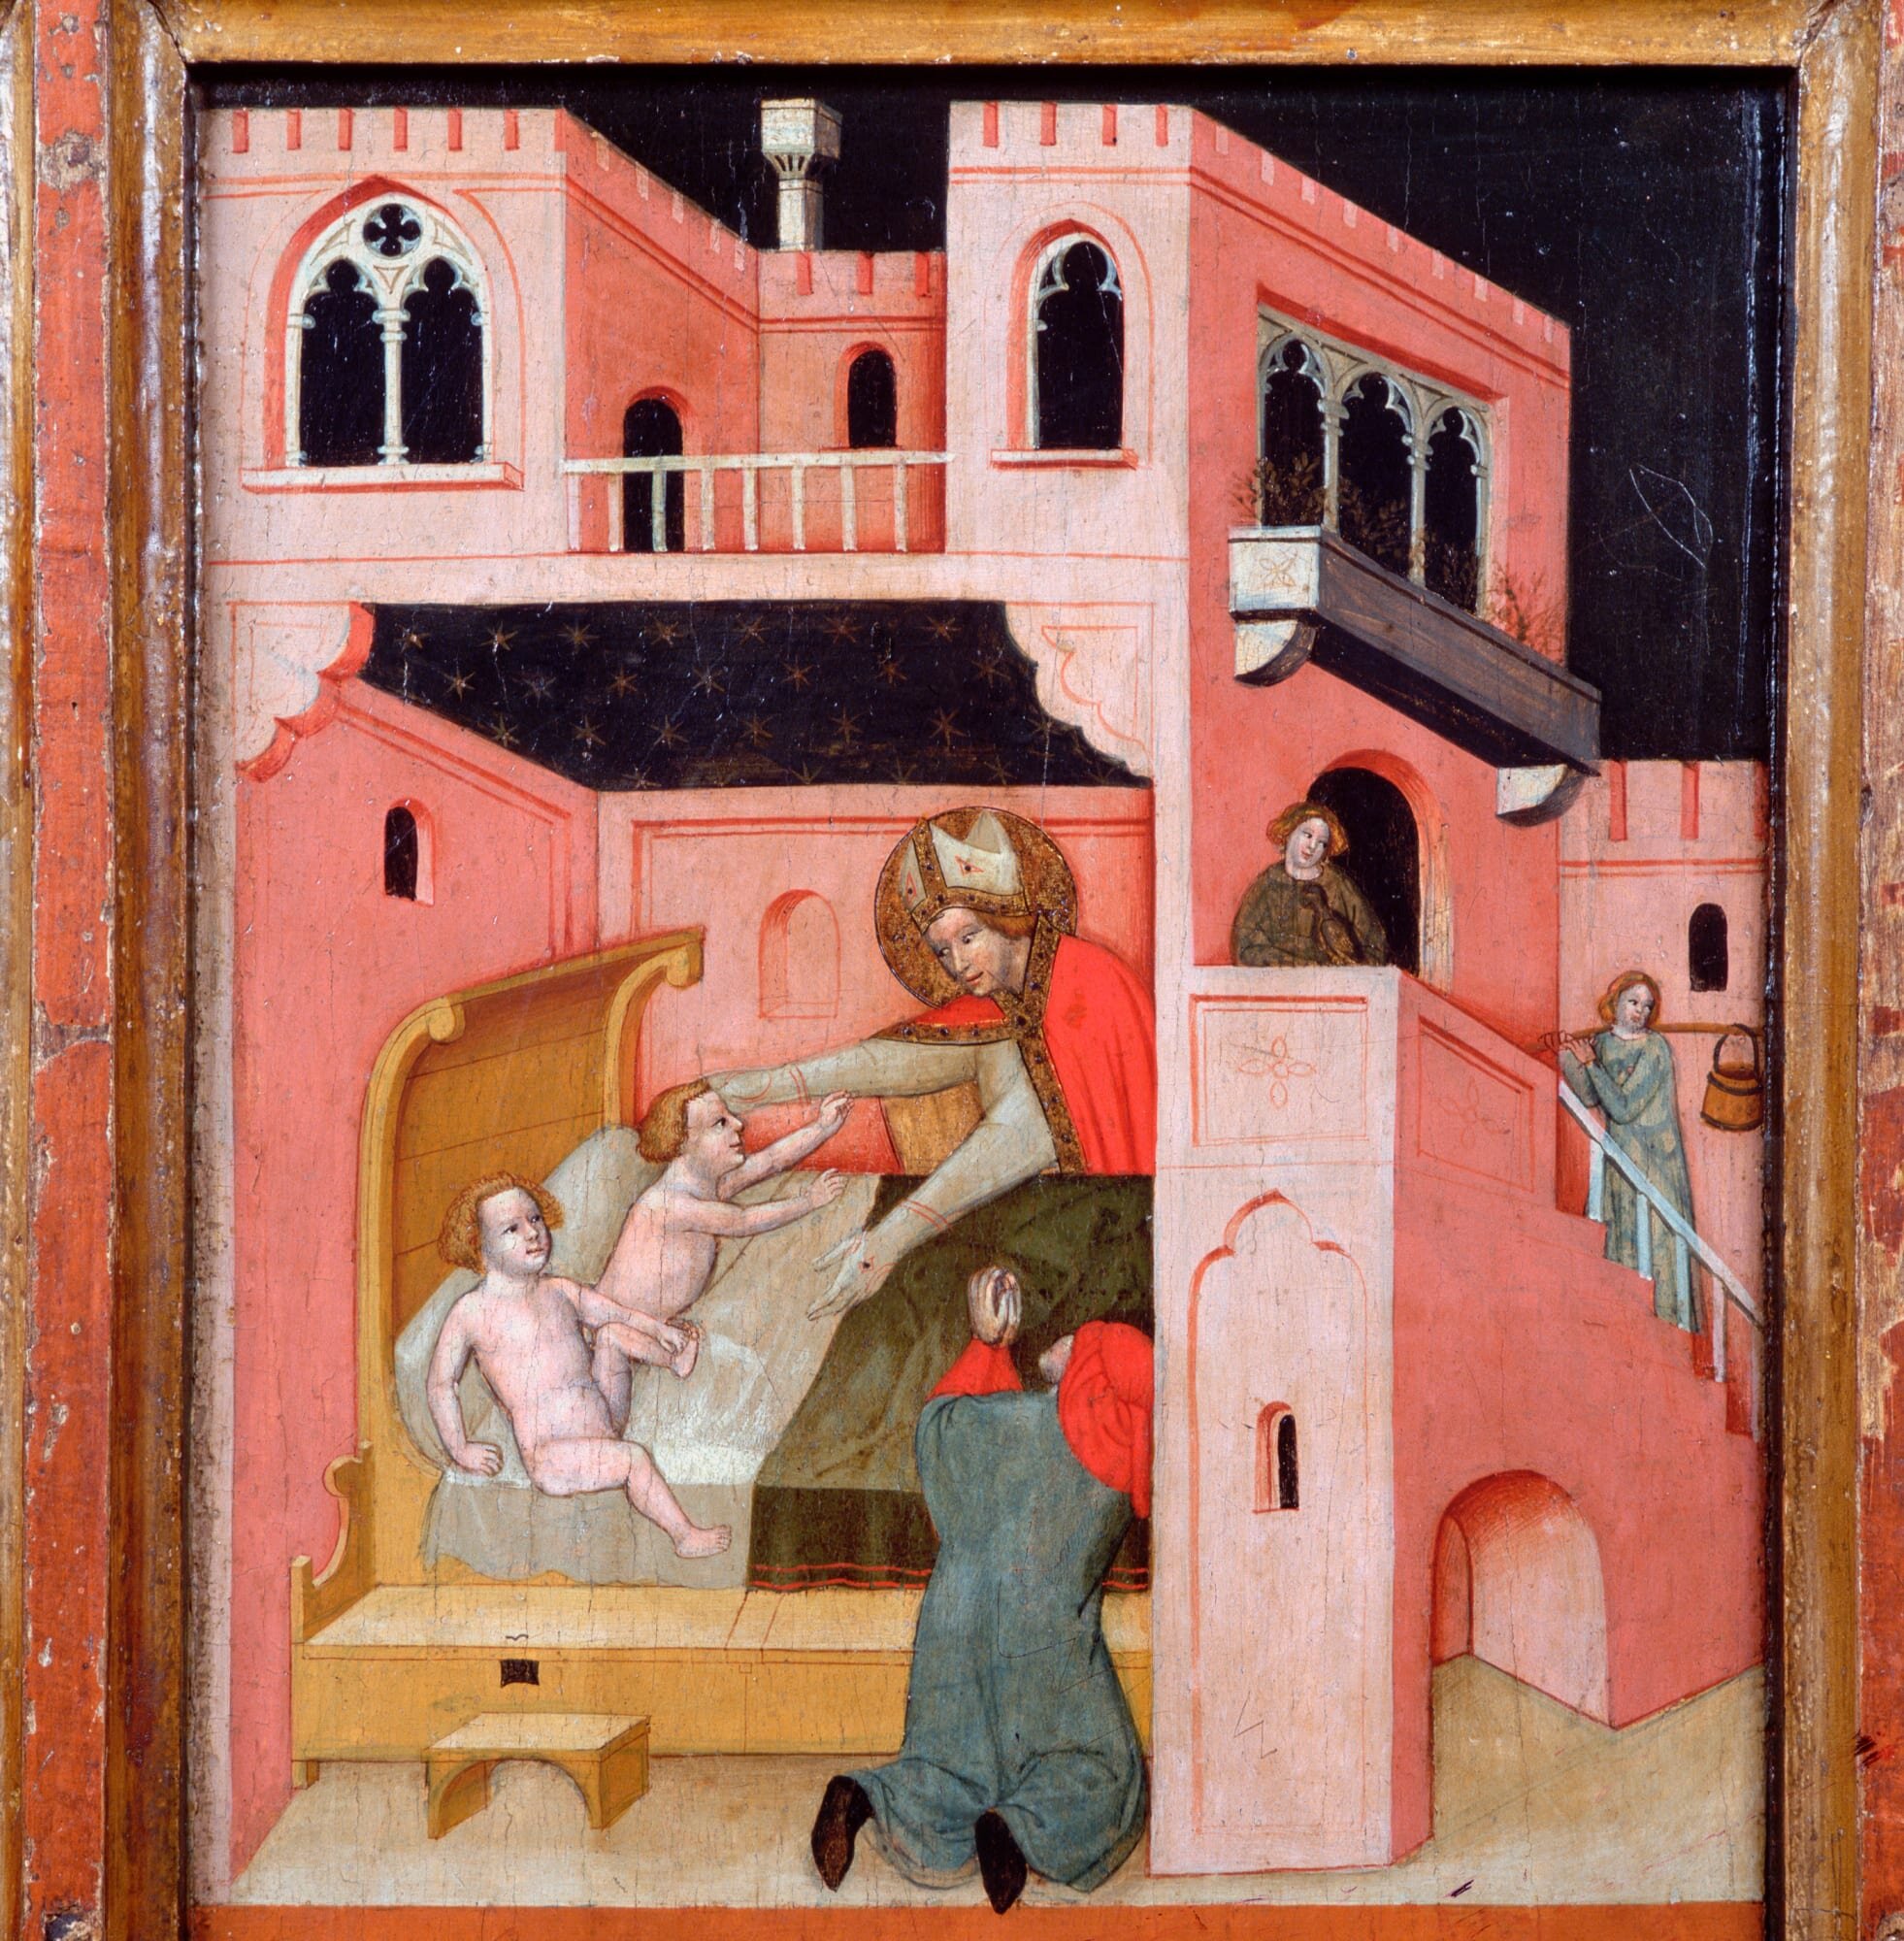  A 14th c. panel painting of St Nicholas helping children by Vitale da Bologna 